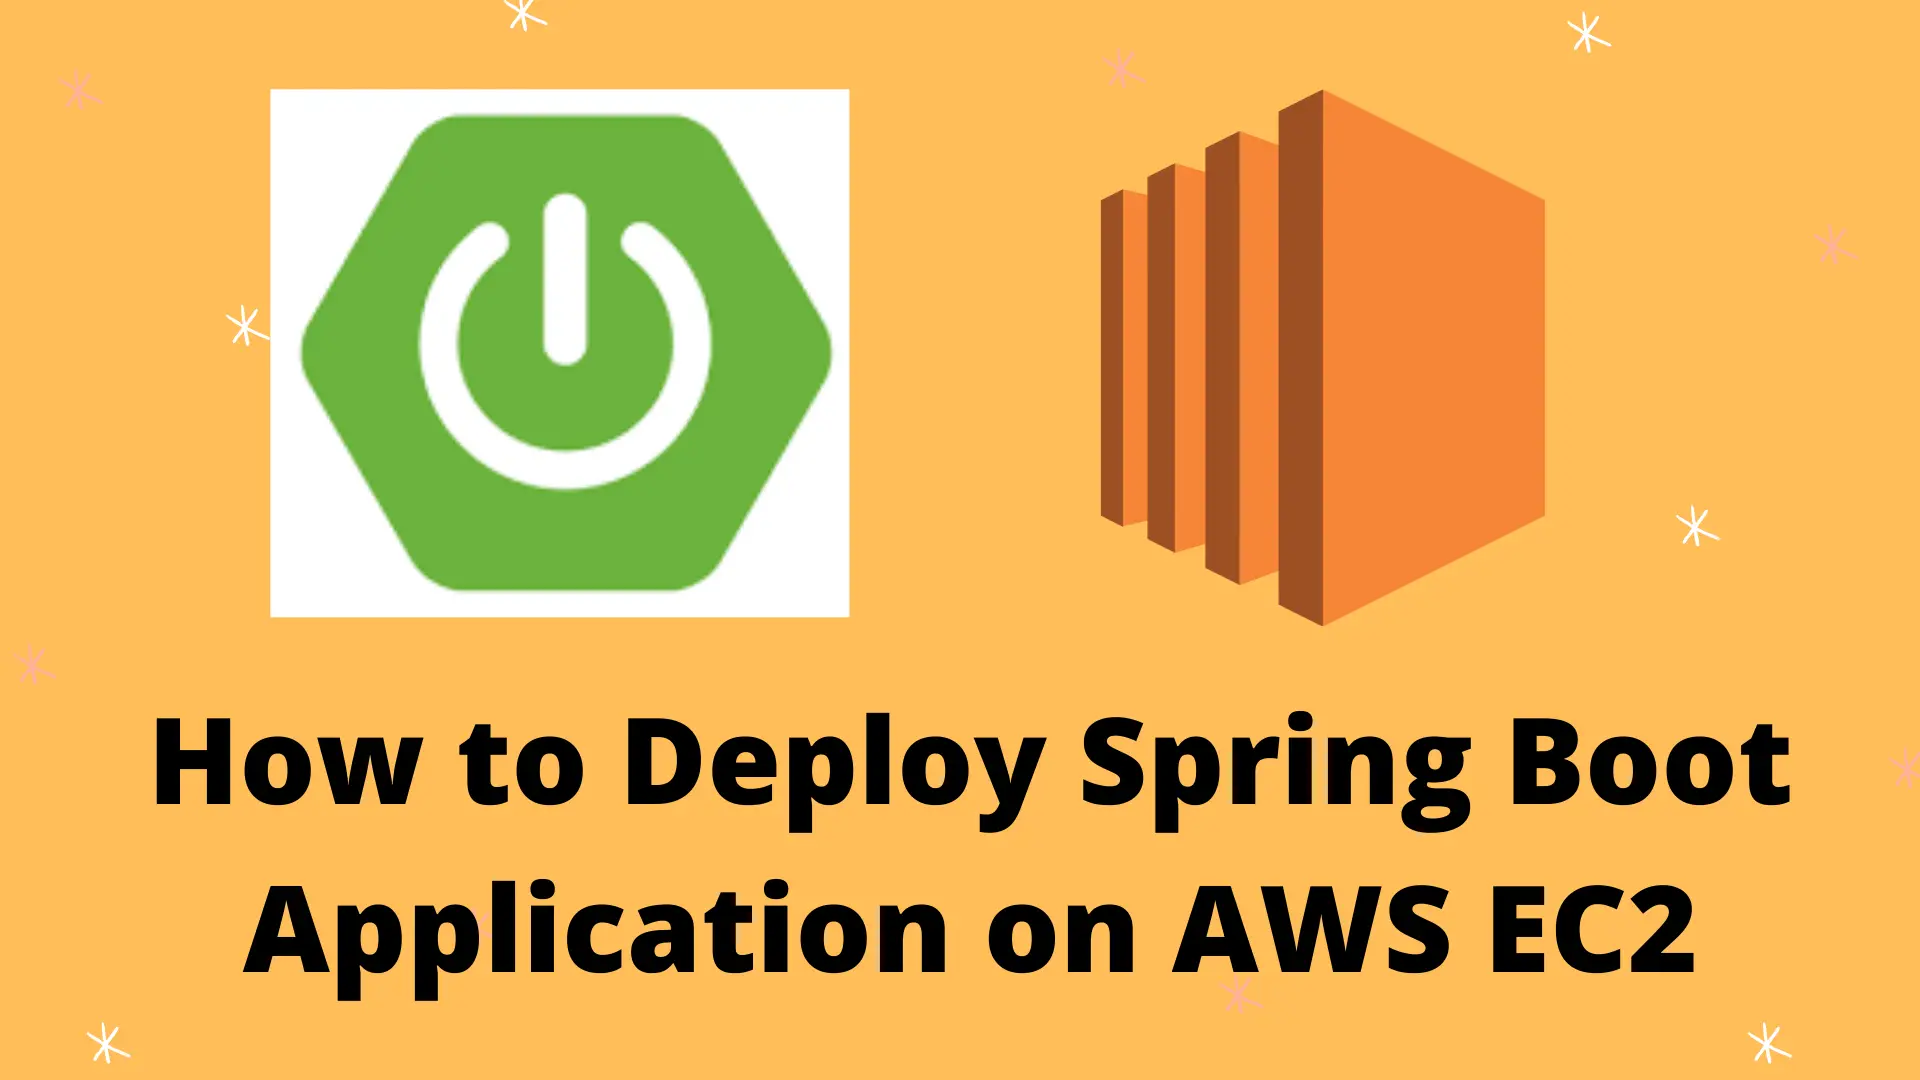 How to Deploy Spring Boot Application on AWS EC2